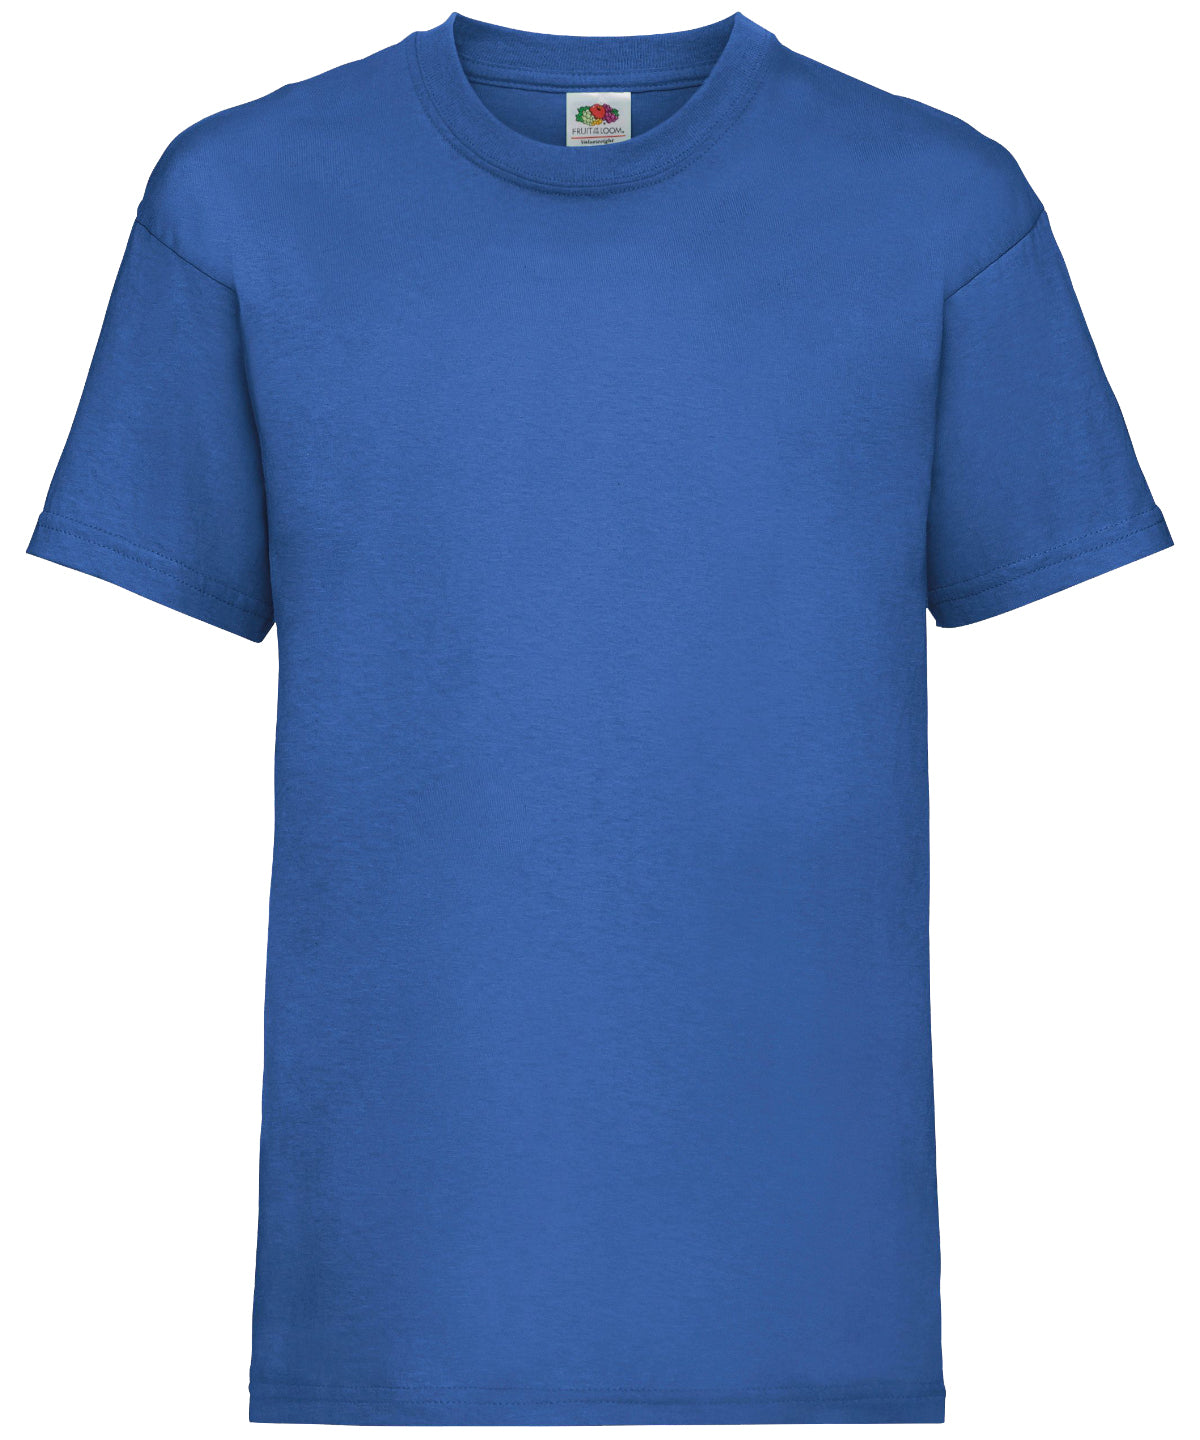 Fruit of the Loom Kids valueweight T Royal Blue